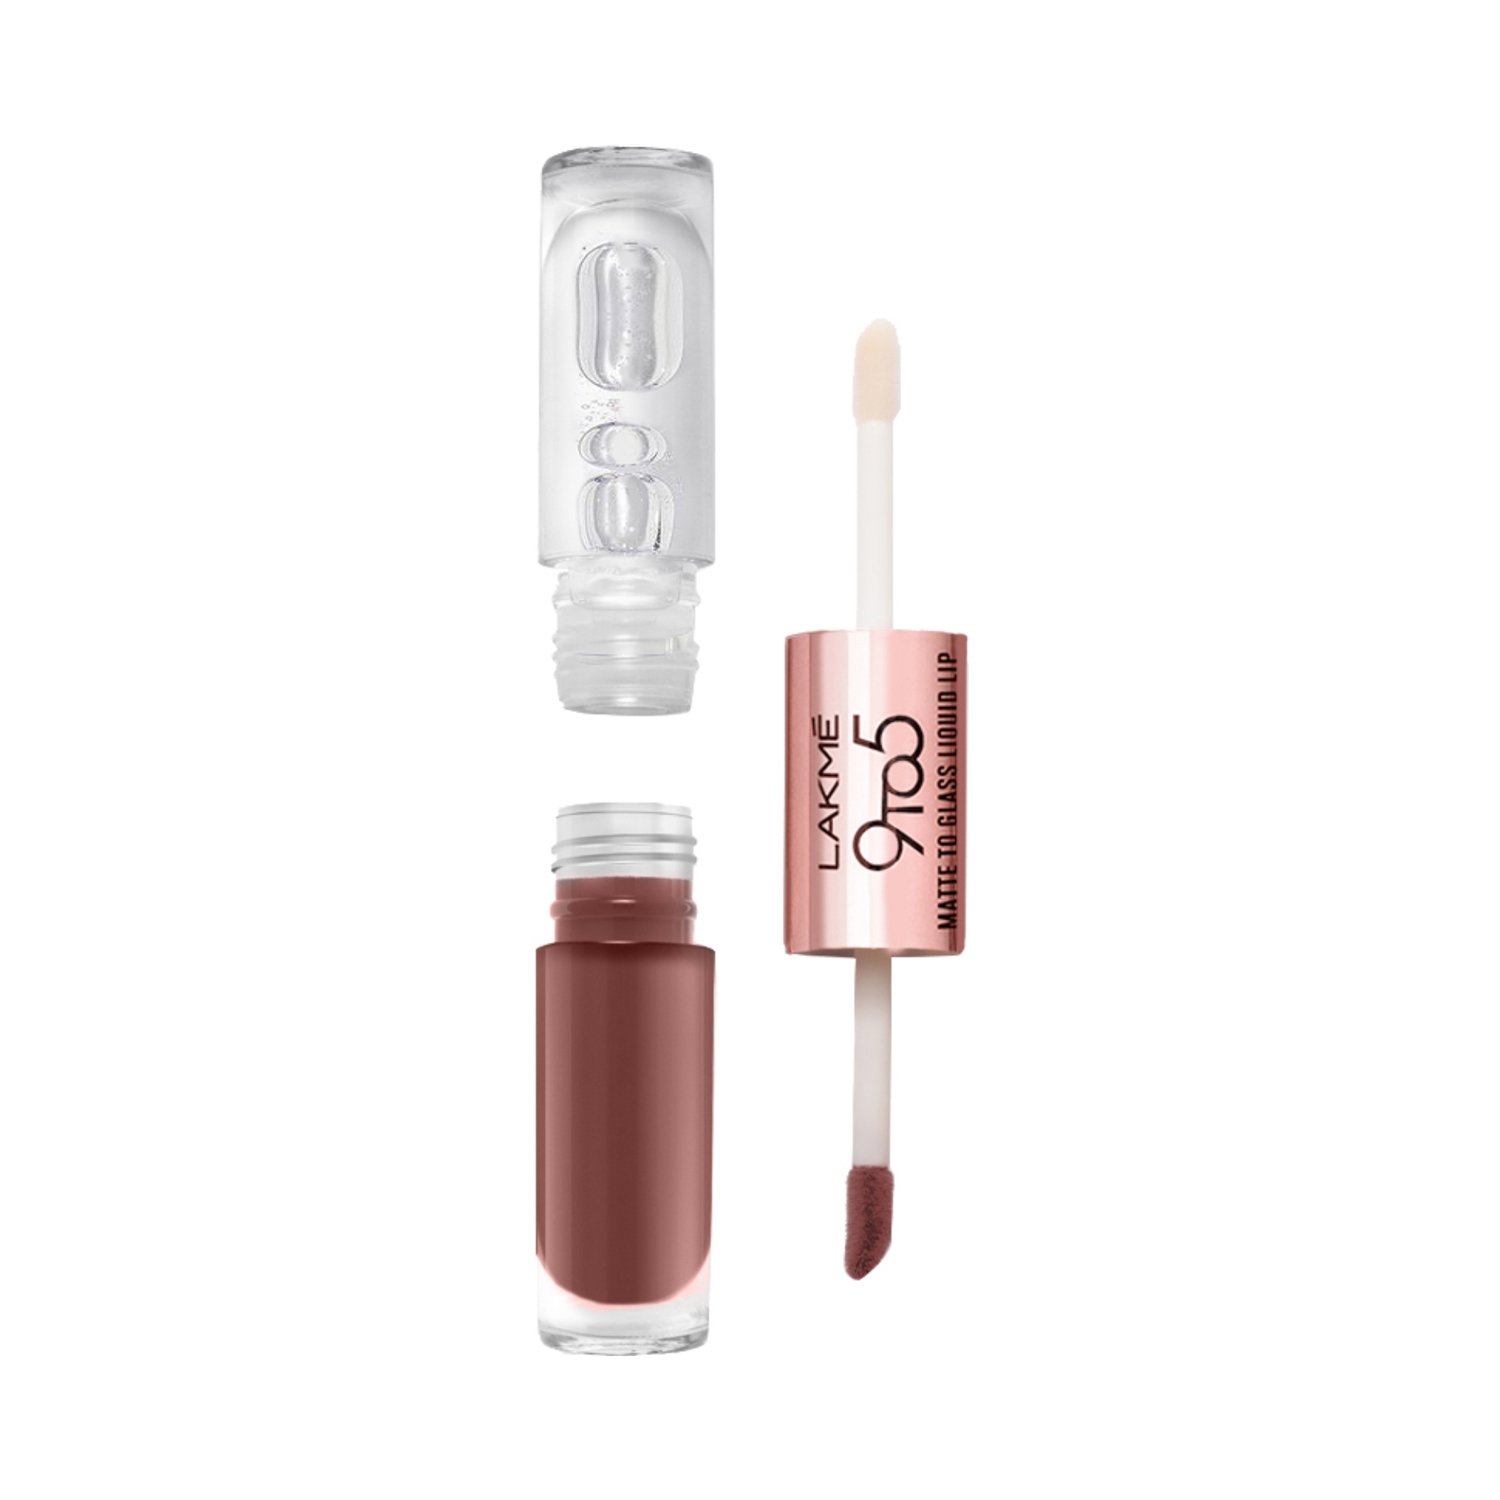 Lakme | Lakme 9 To 5 Matte To Glass Liquid Lip Color - Salted Caramel (7.6ml)